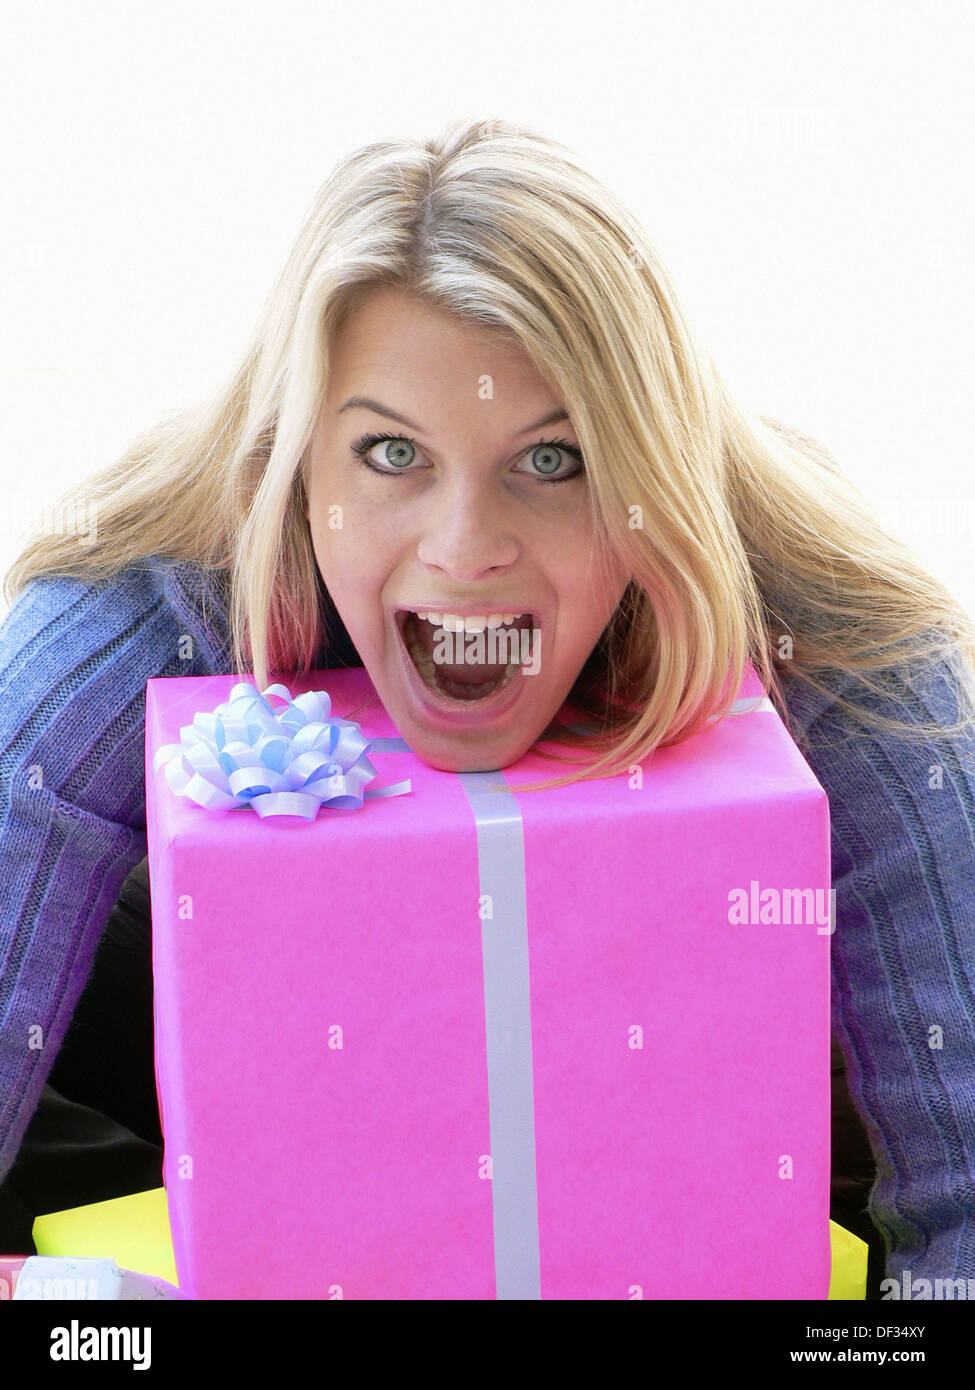 Download preview image - woman-with-gift-boxes-DF34XY